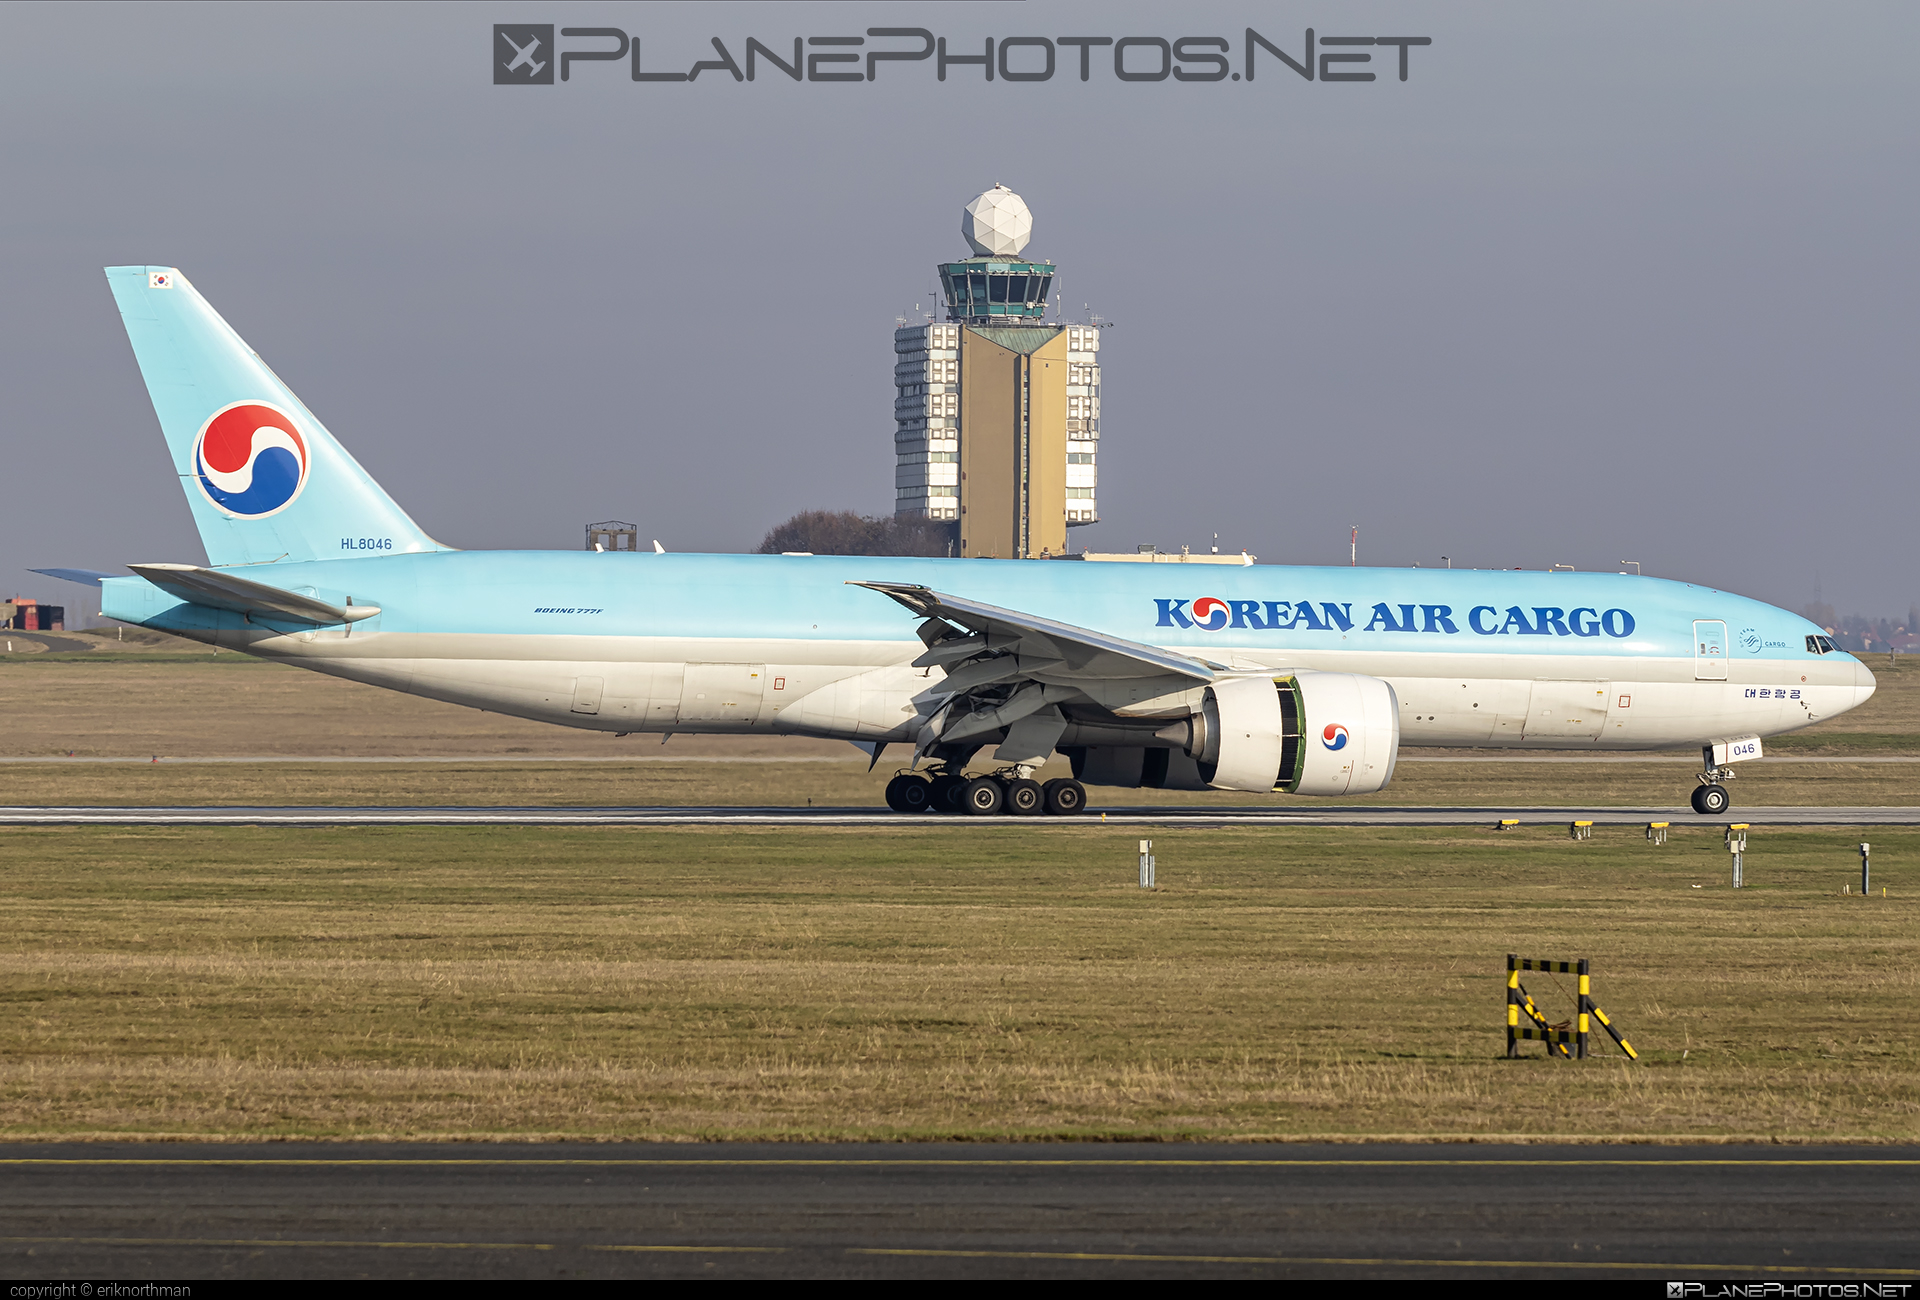 Boeing 777F - HL8046 operated by Korean Air Cargo #b777 #b777f #b777freighter #boeing #boeing777 #koreanair #koreanaircargo #tripleseven